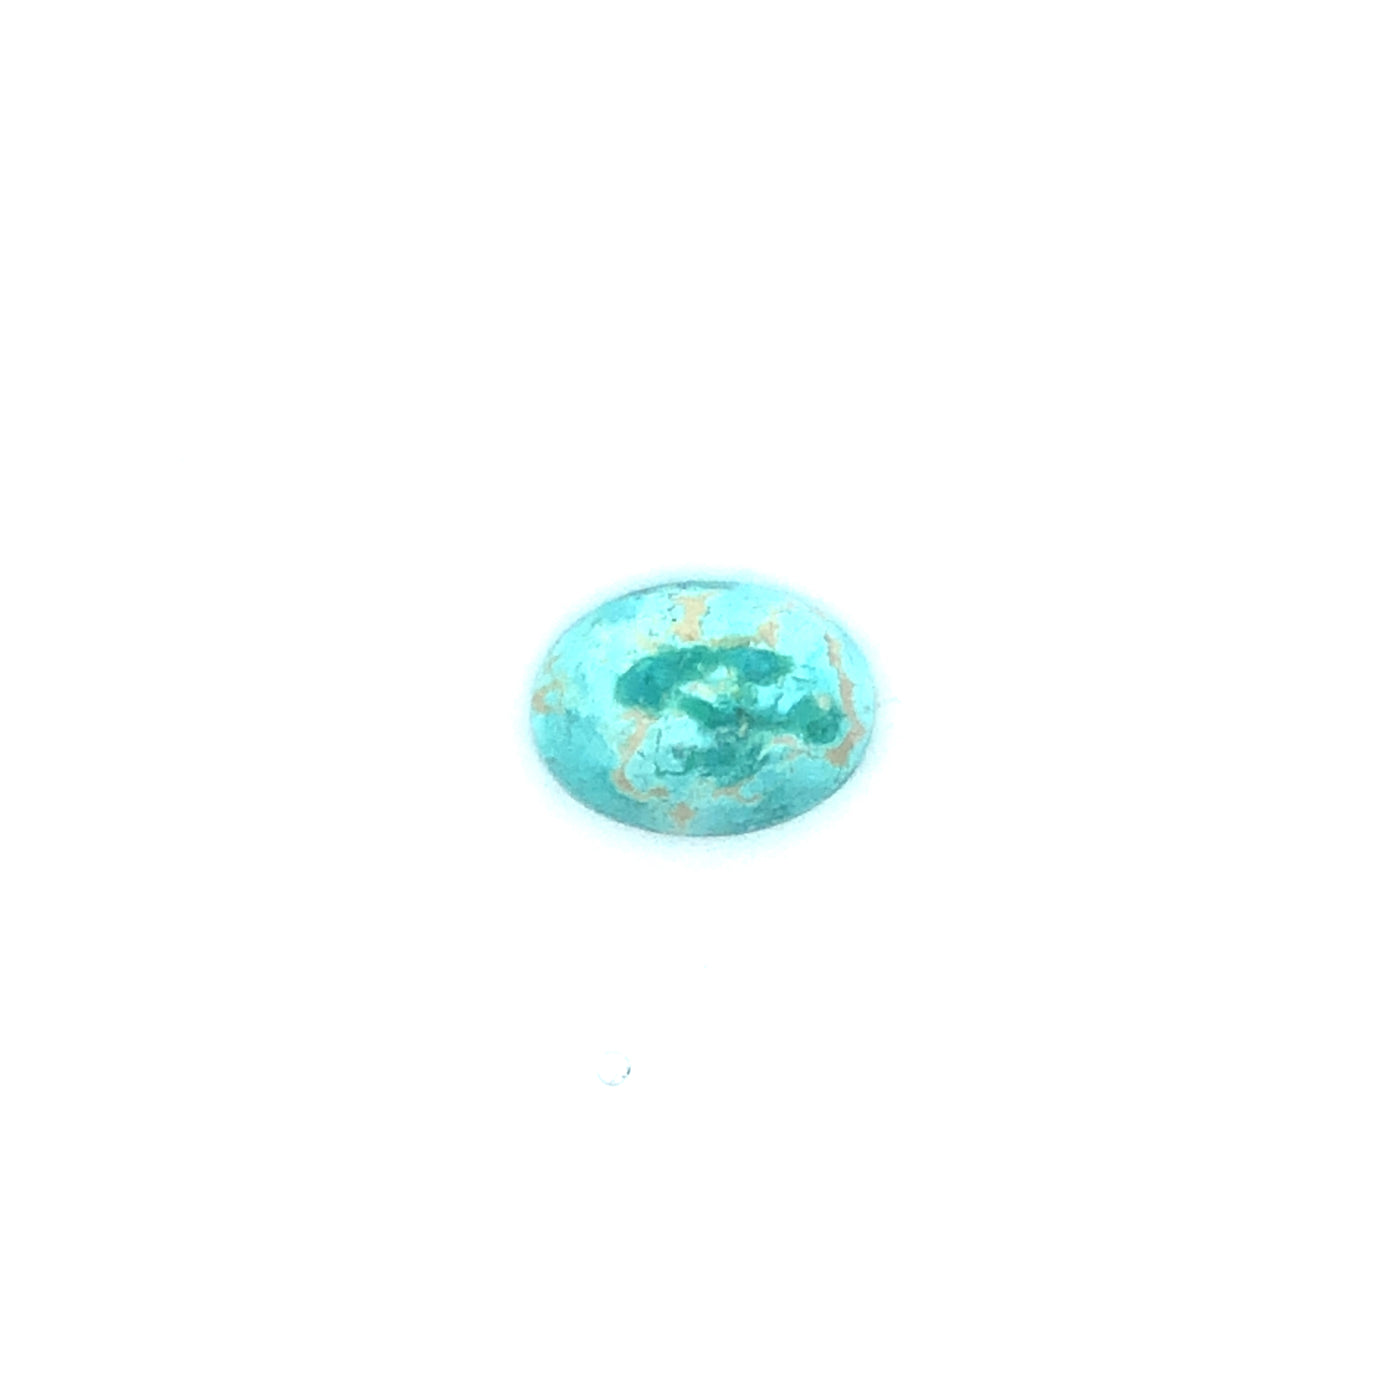 Loose Narooma Turquoise Oval Shaped 6.82Ct Blue With Some White And Open Surfaces